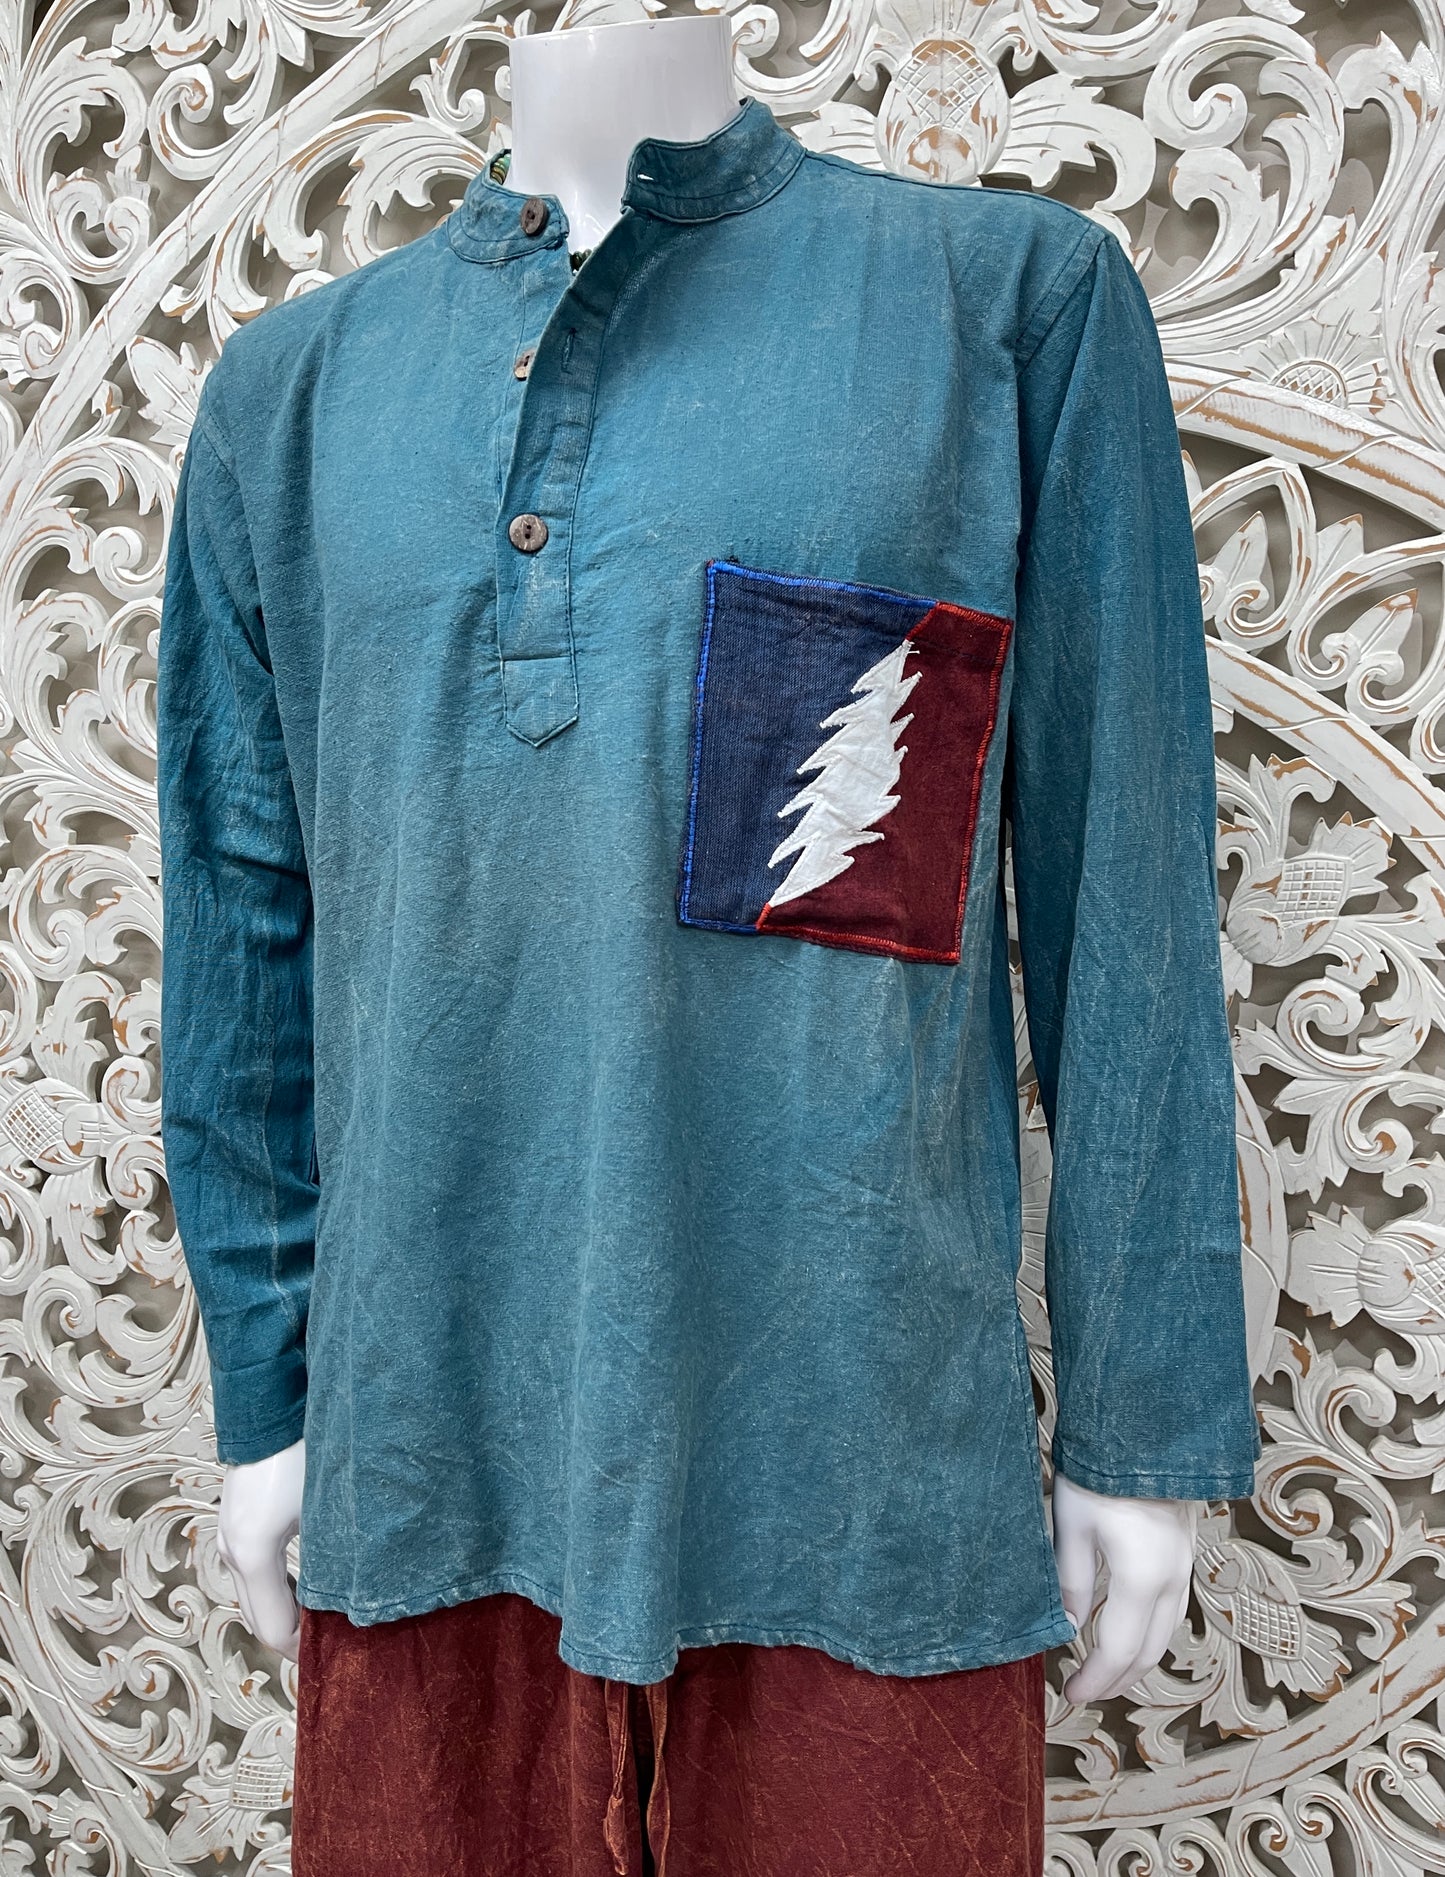 Cotton Lightning Bolt Shirts- Hidden Pockets  Available in 3 Colors